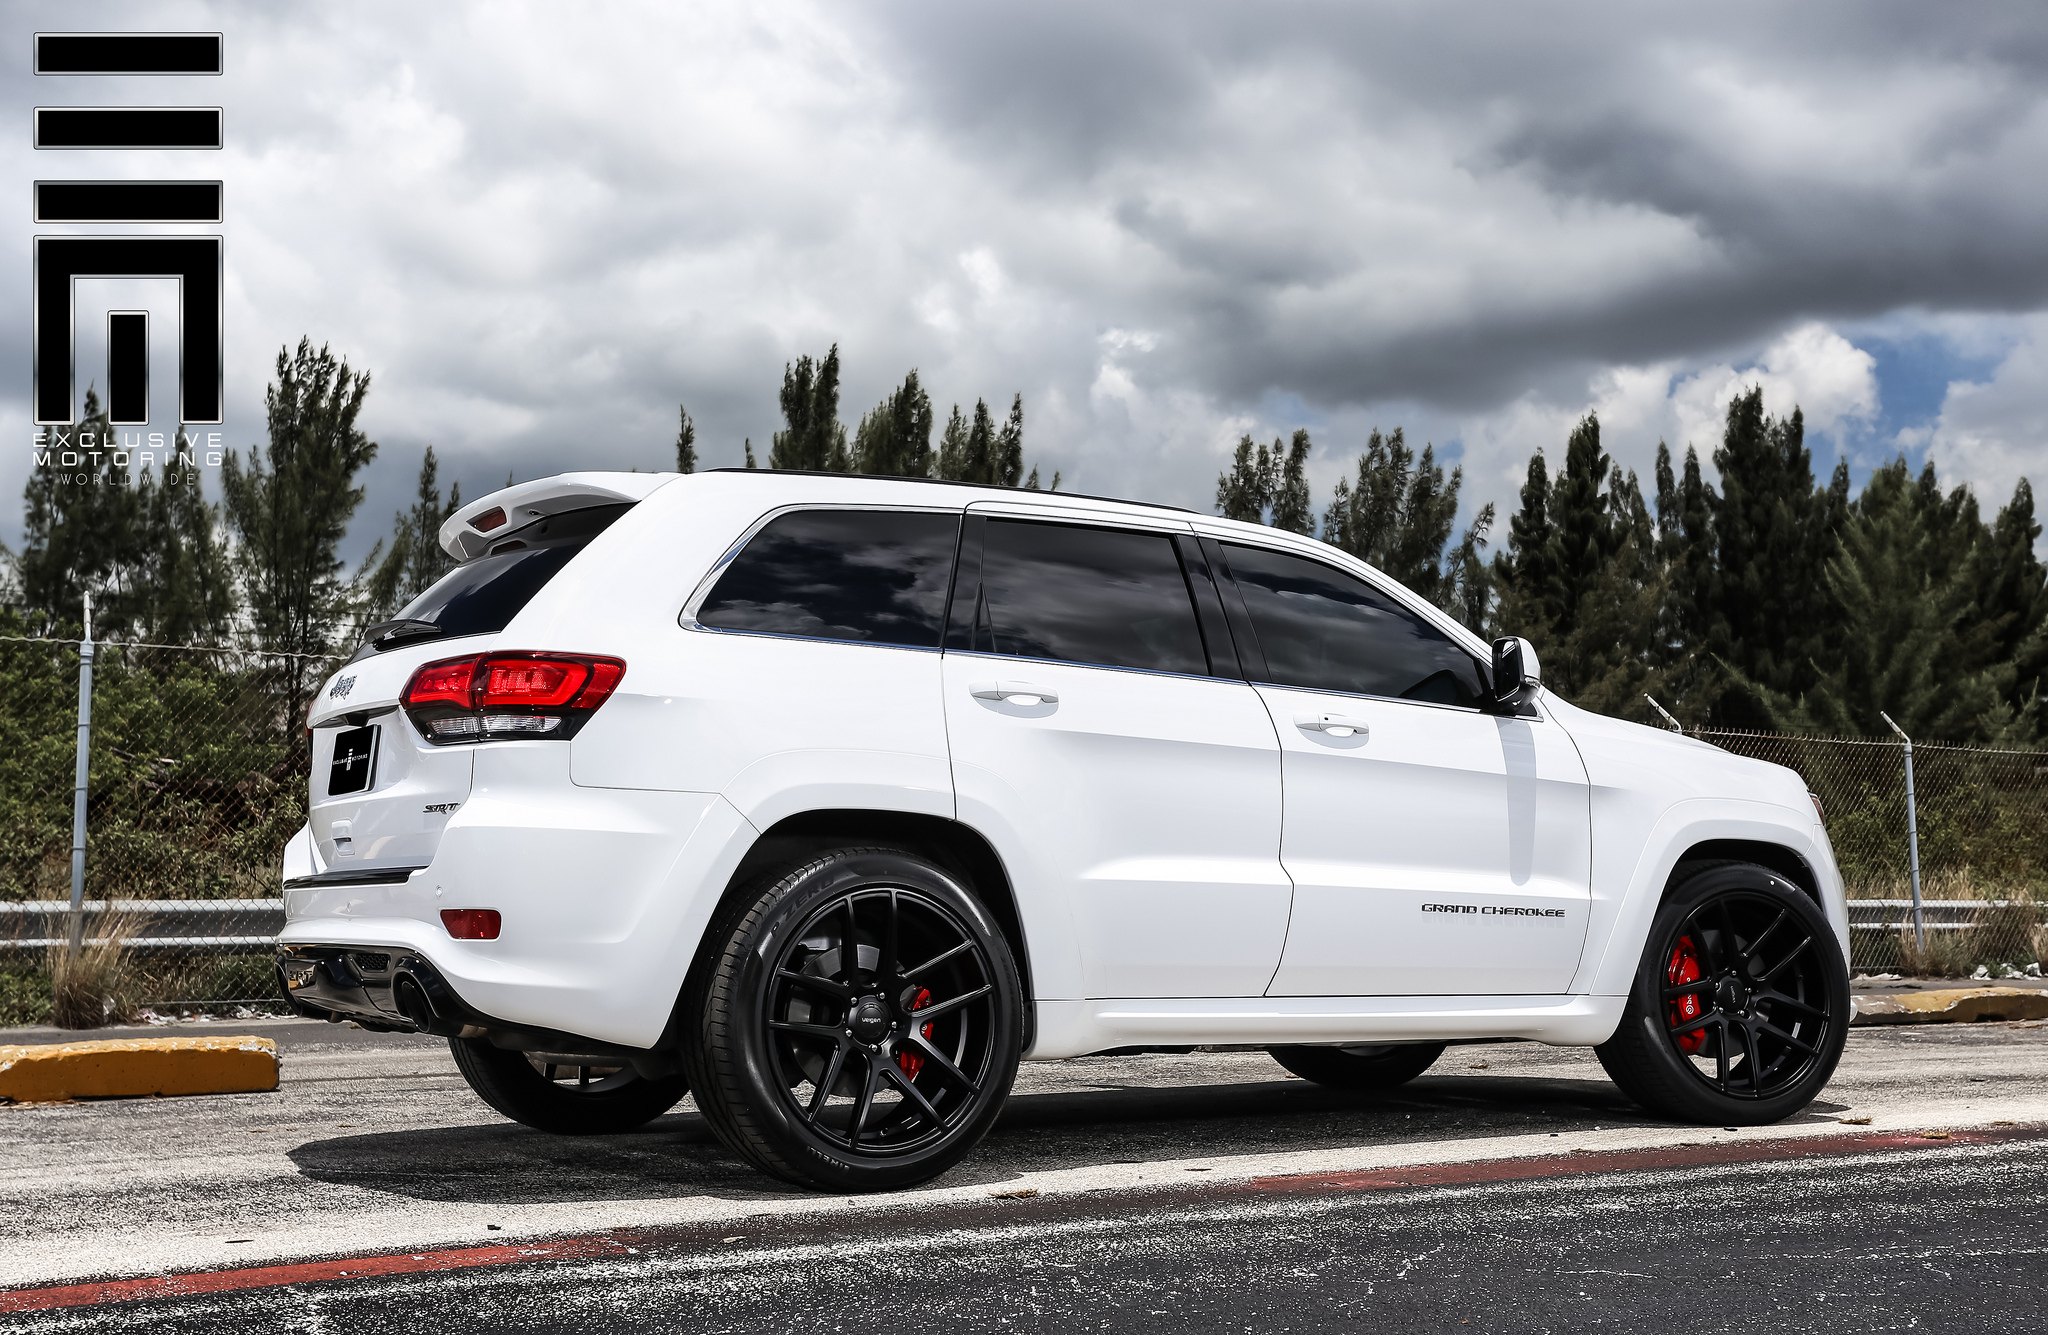 Jeep Grand Cherokee SRT With Black Rims and Red Brakes - Photo by Exclusive Motoring